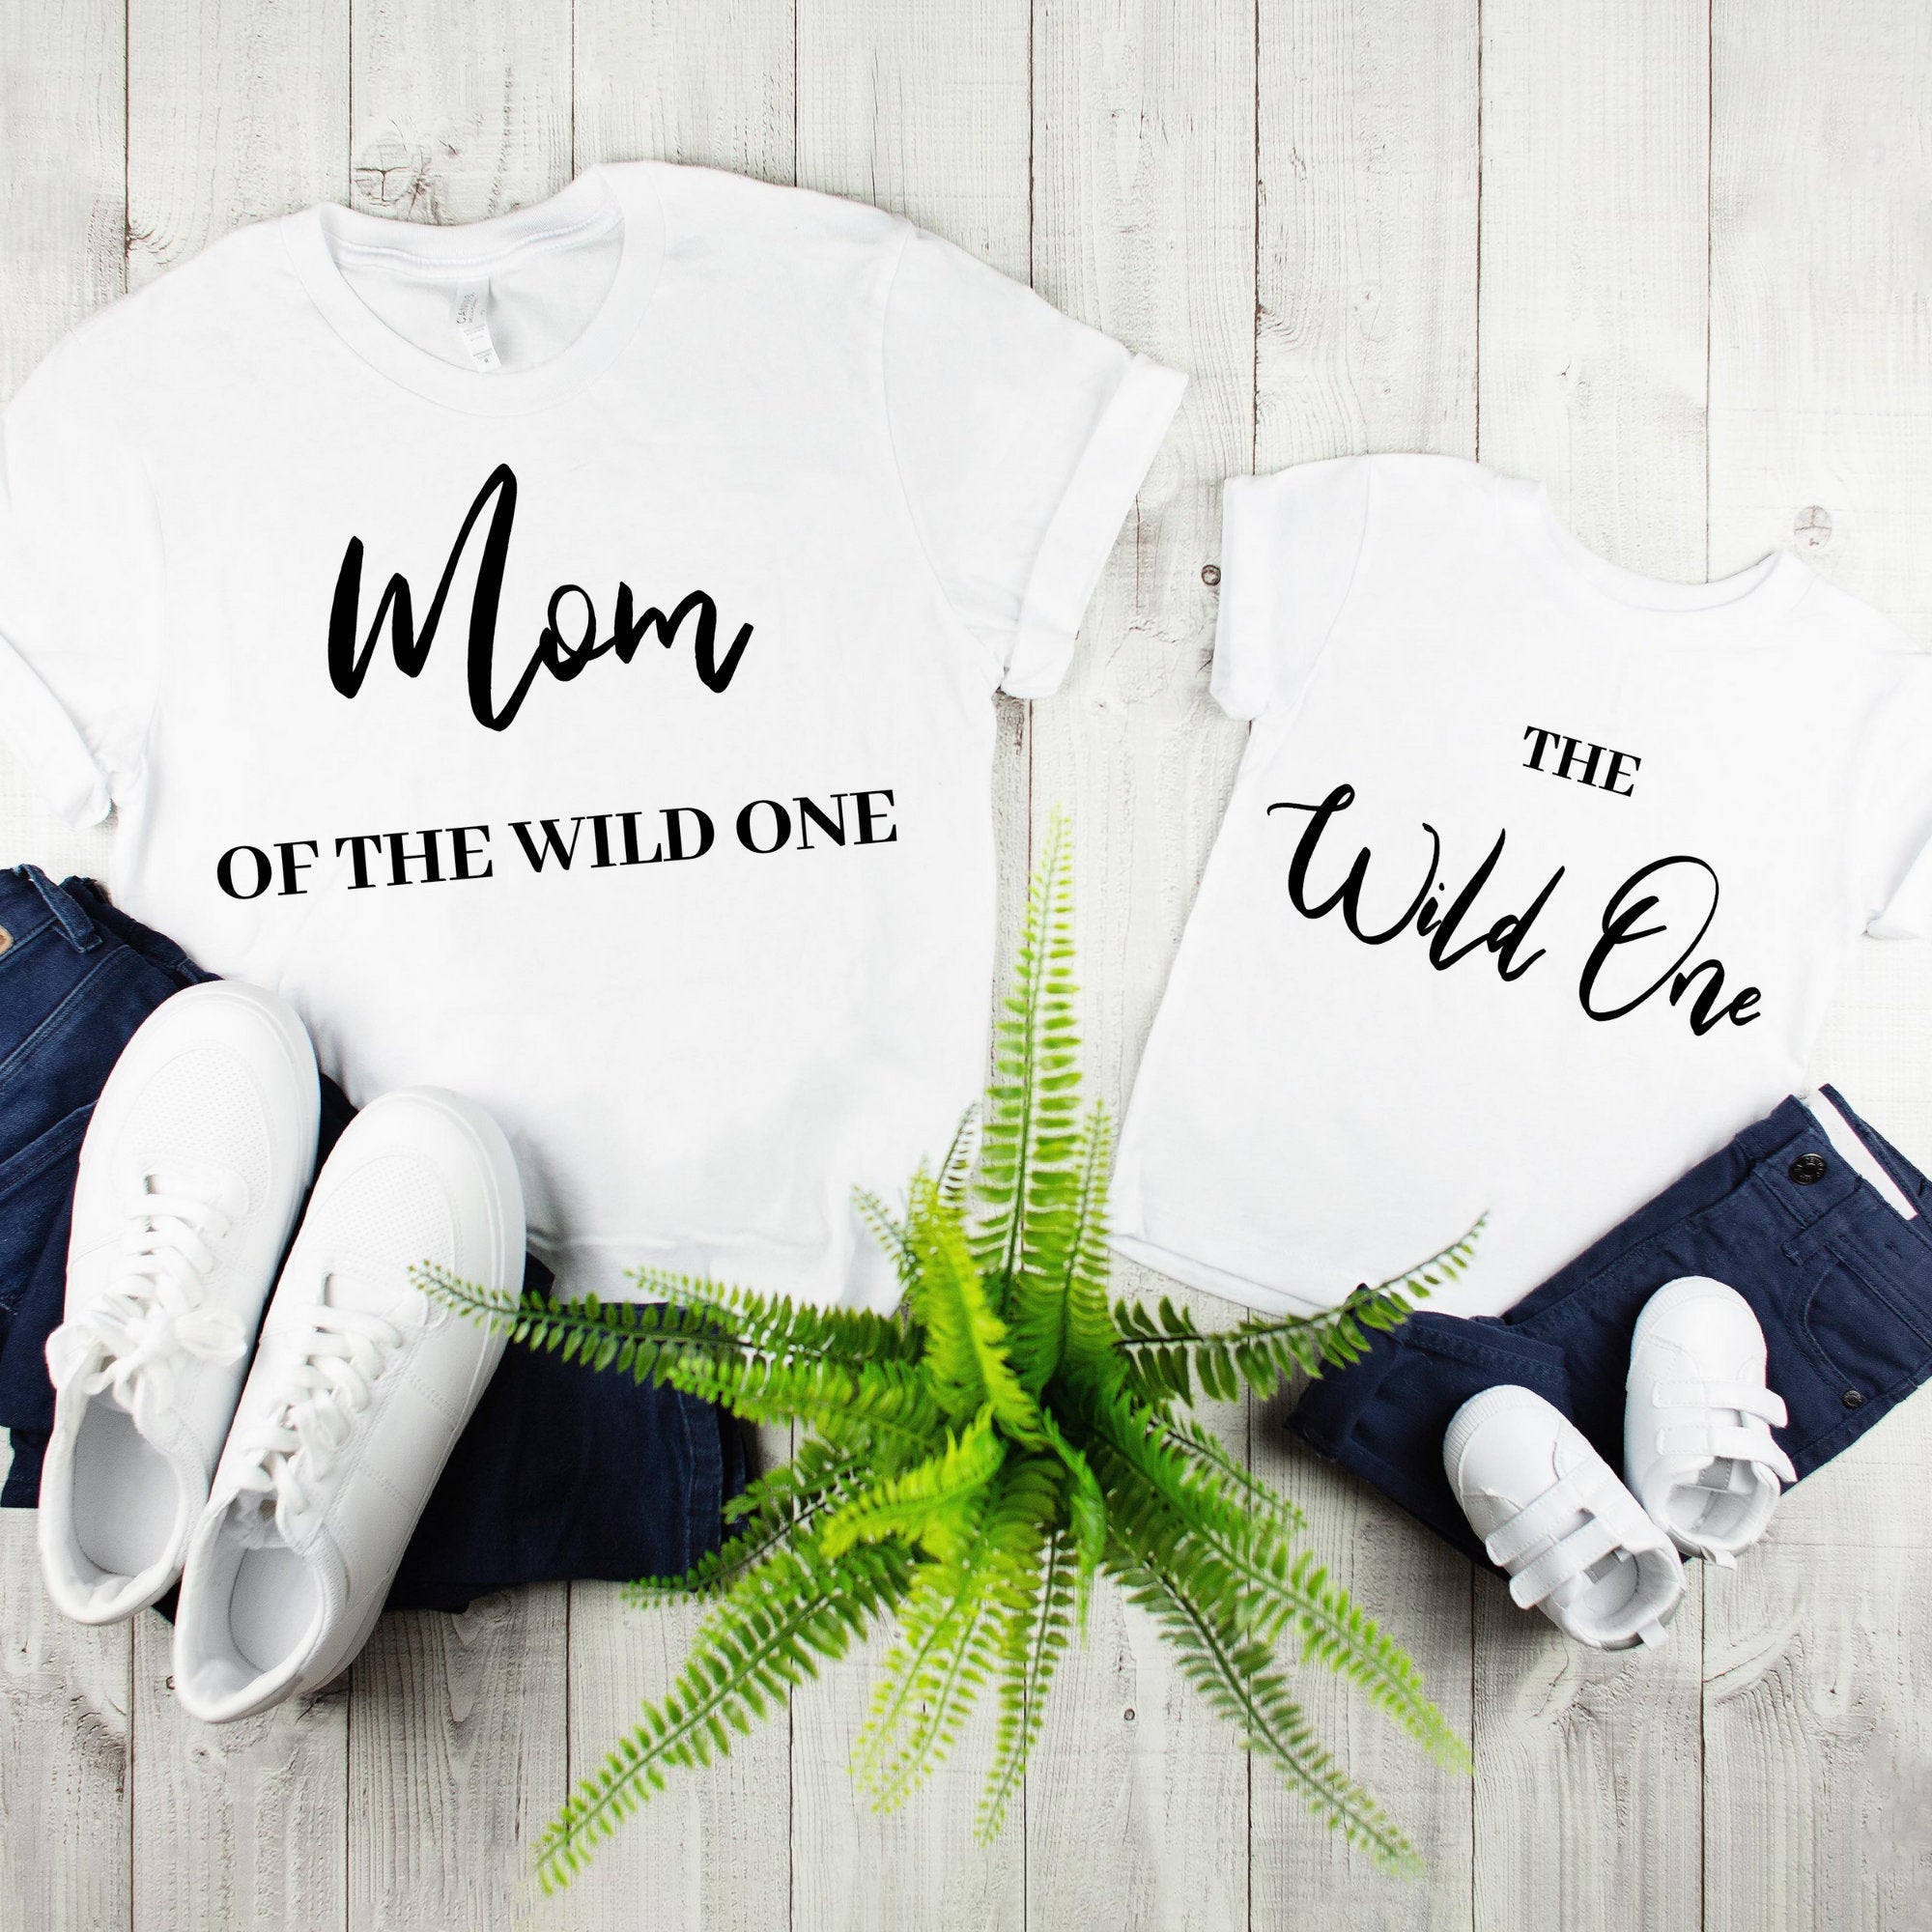 Mom of the Wild One Ladies Tee & The Wild One Toddler Tee, Mother Son Matching Shirts,Mother Daughter Matching Shirts,Funny Matching Shirts - MamaBuzz Creations